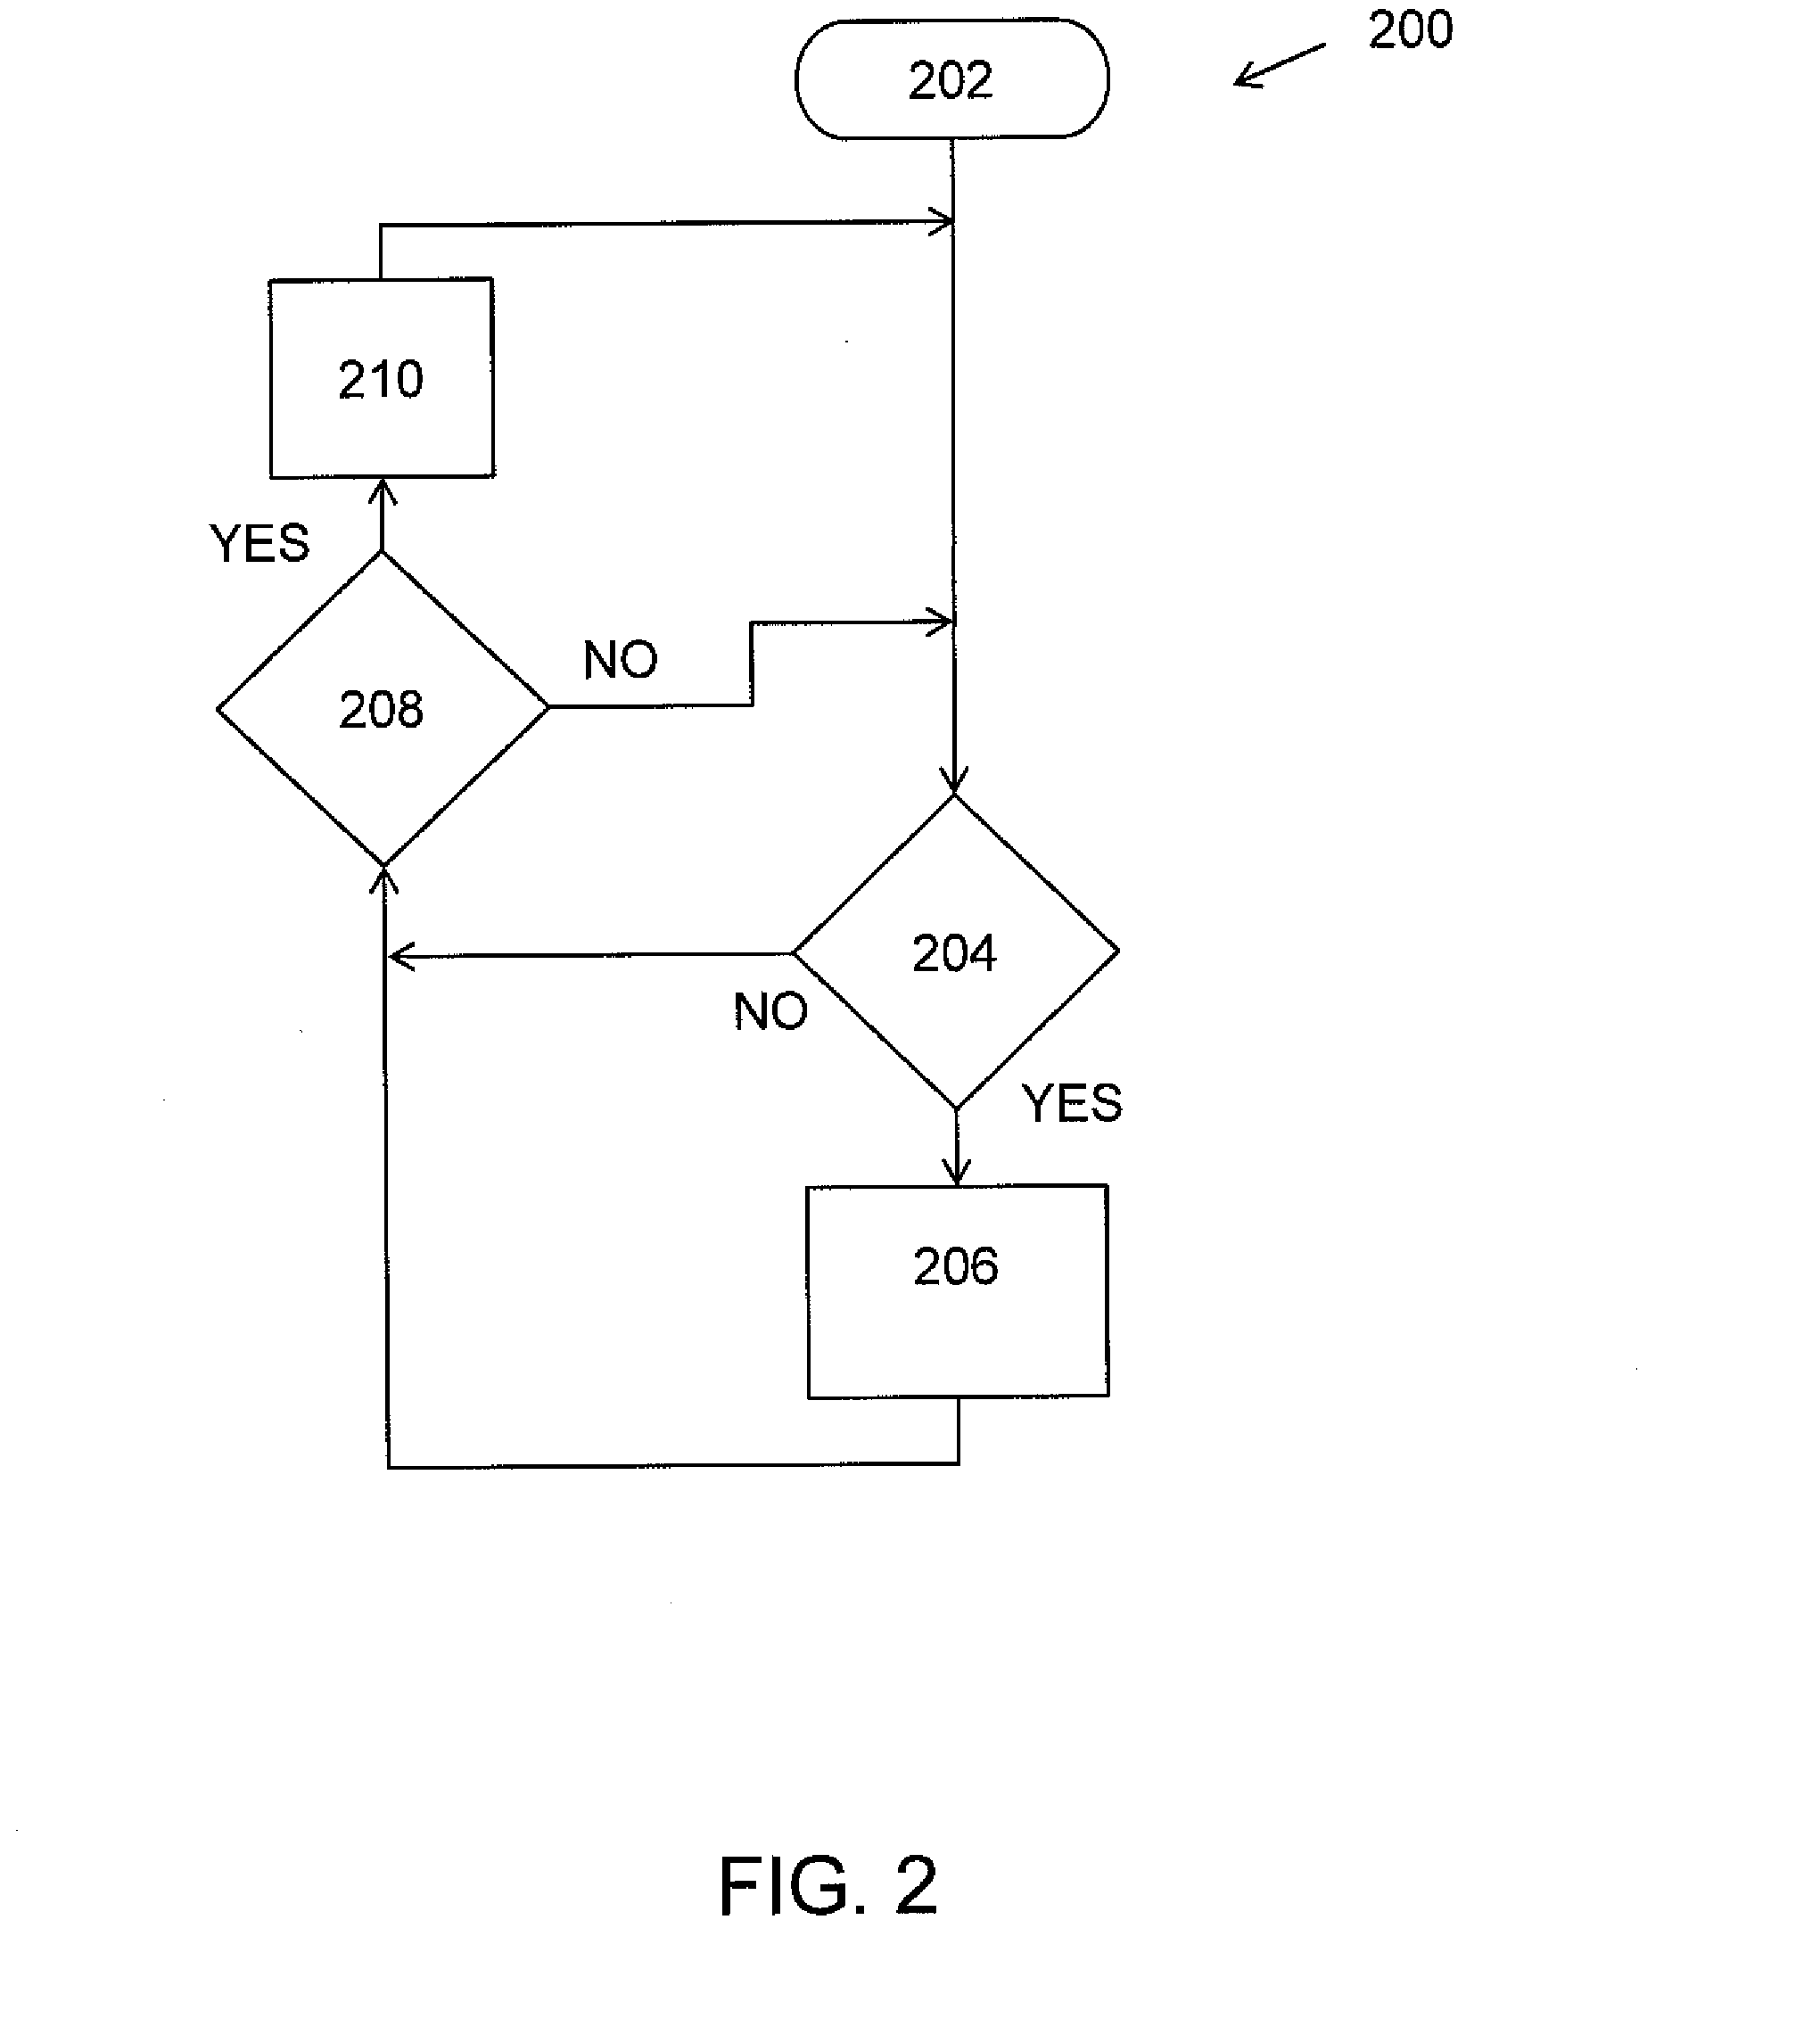 Regenerative Braking System for a Hybrid Electric Vehicle and a Corresponding Method